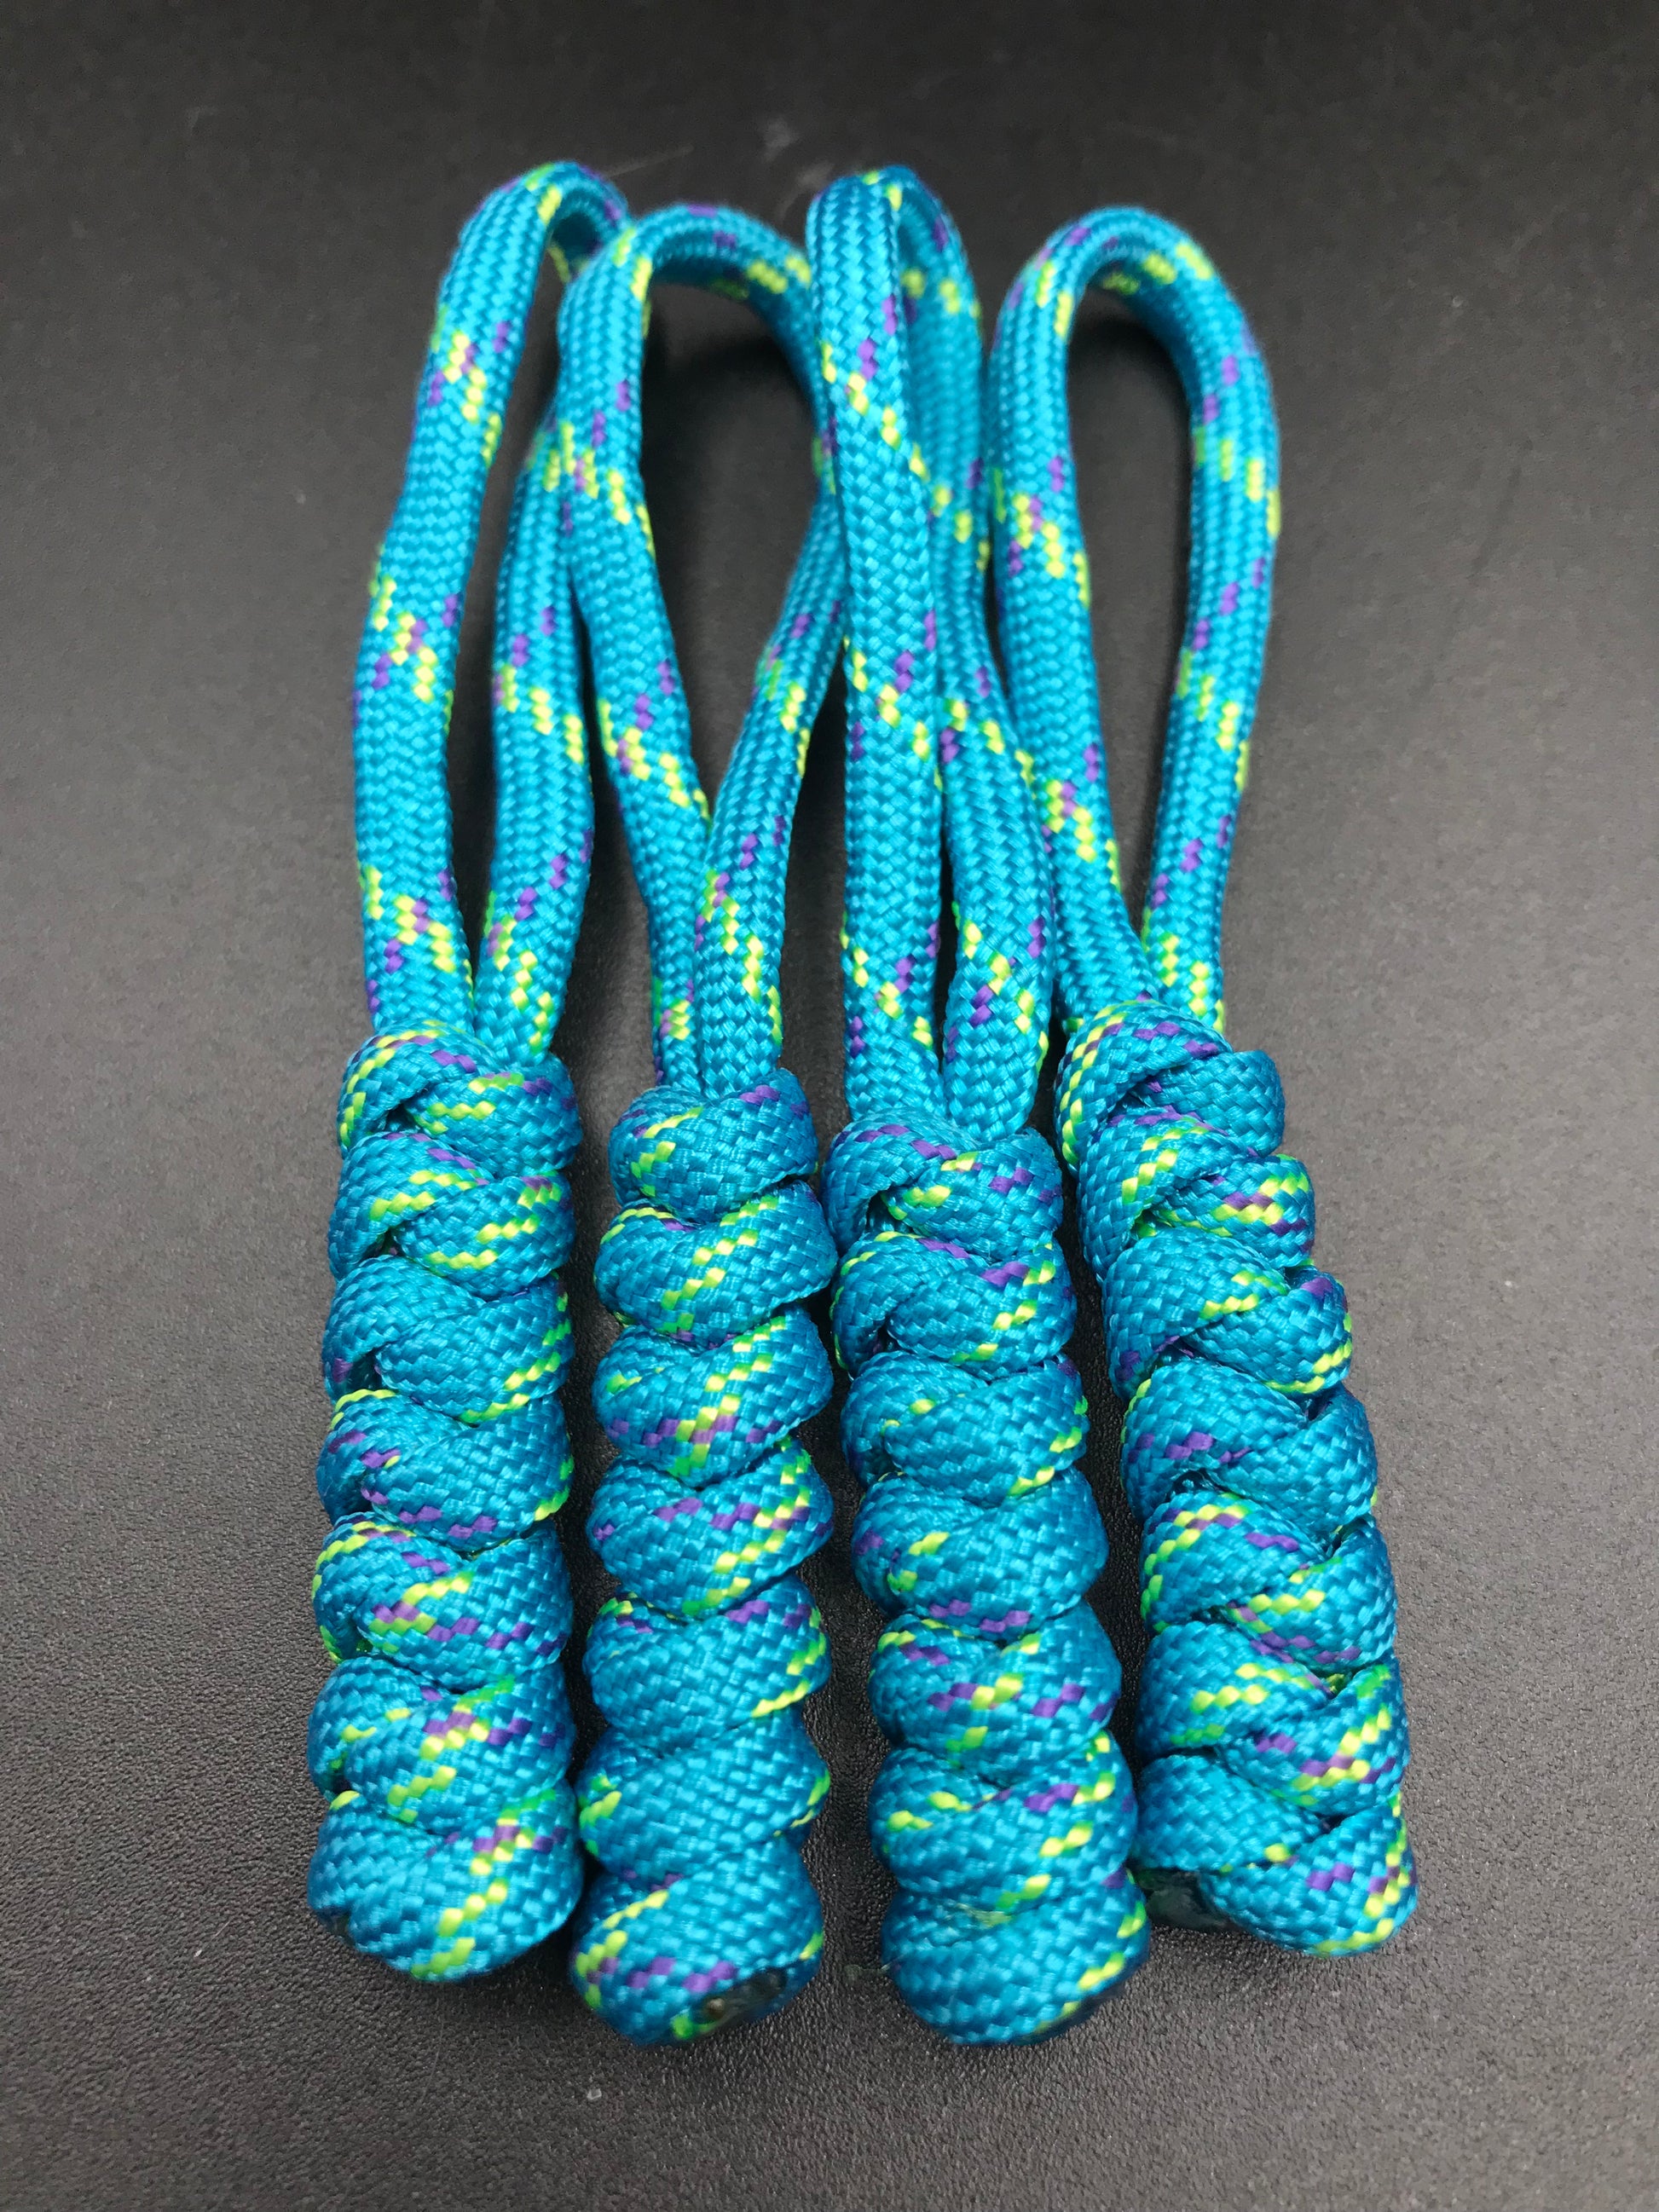 Paracord Zipper-Pull with Diamond Knot - Survival Colorful Luggage Identity  Zipper Assist